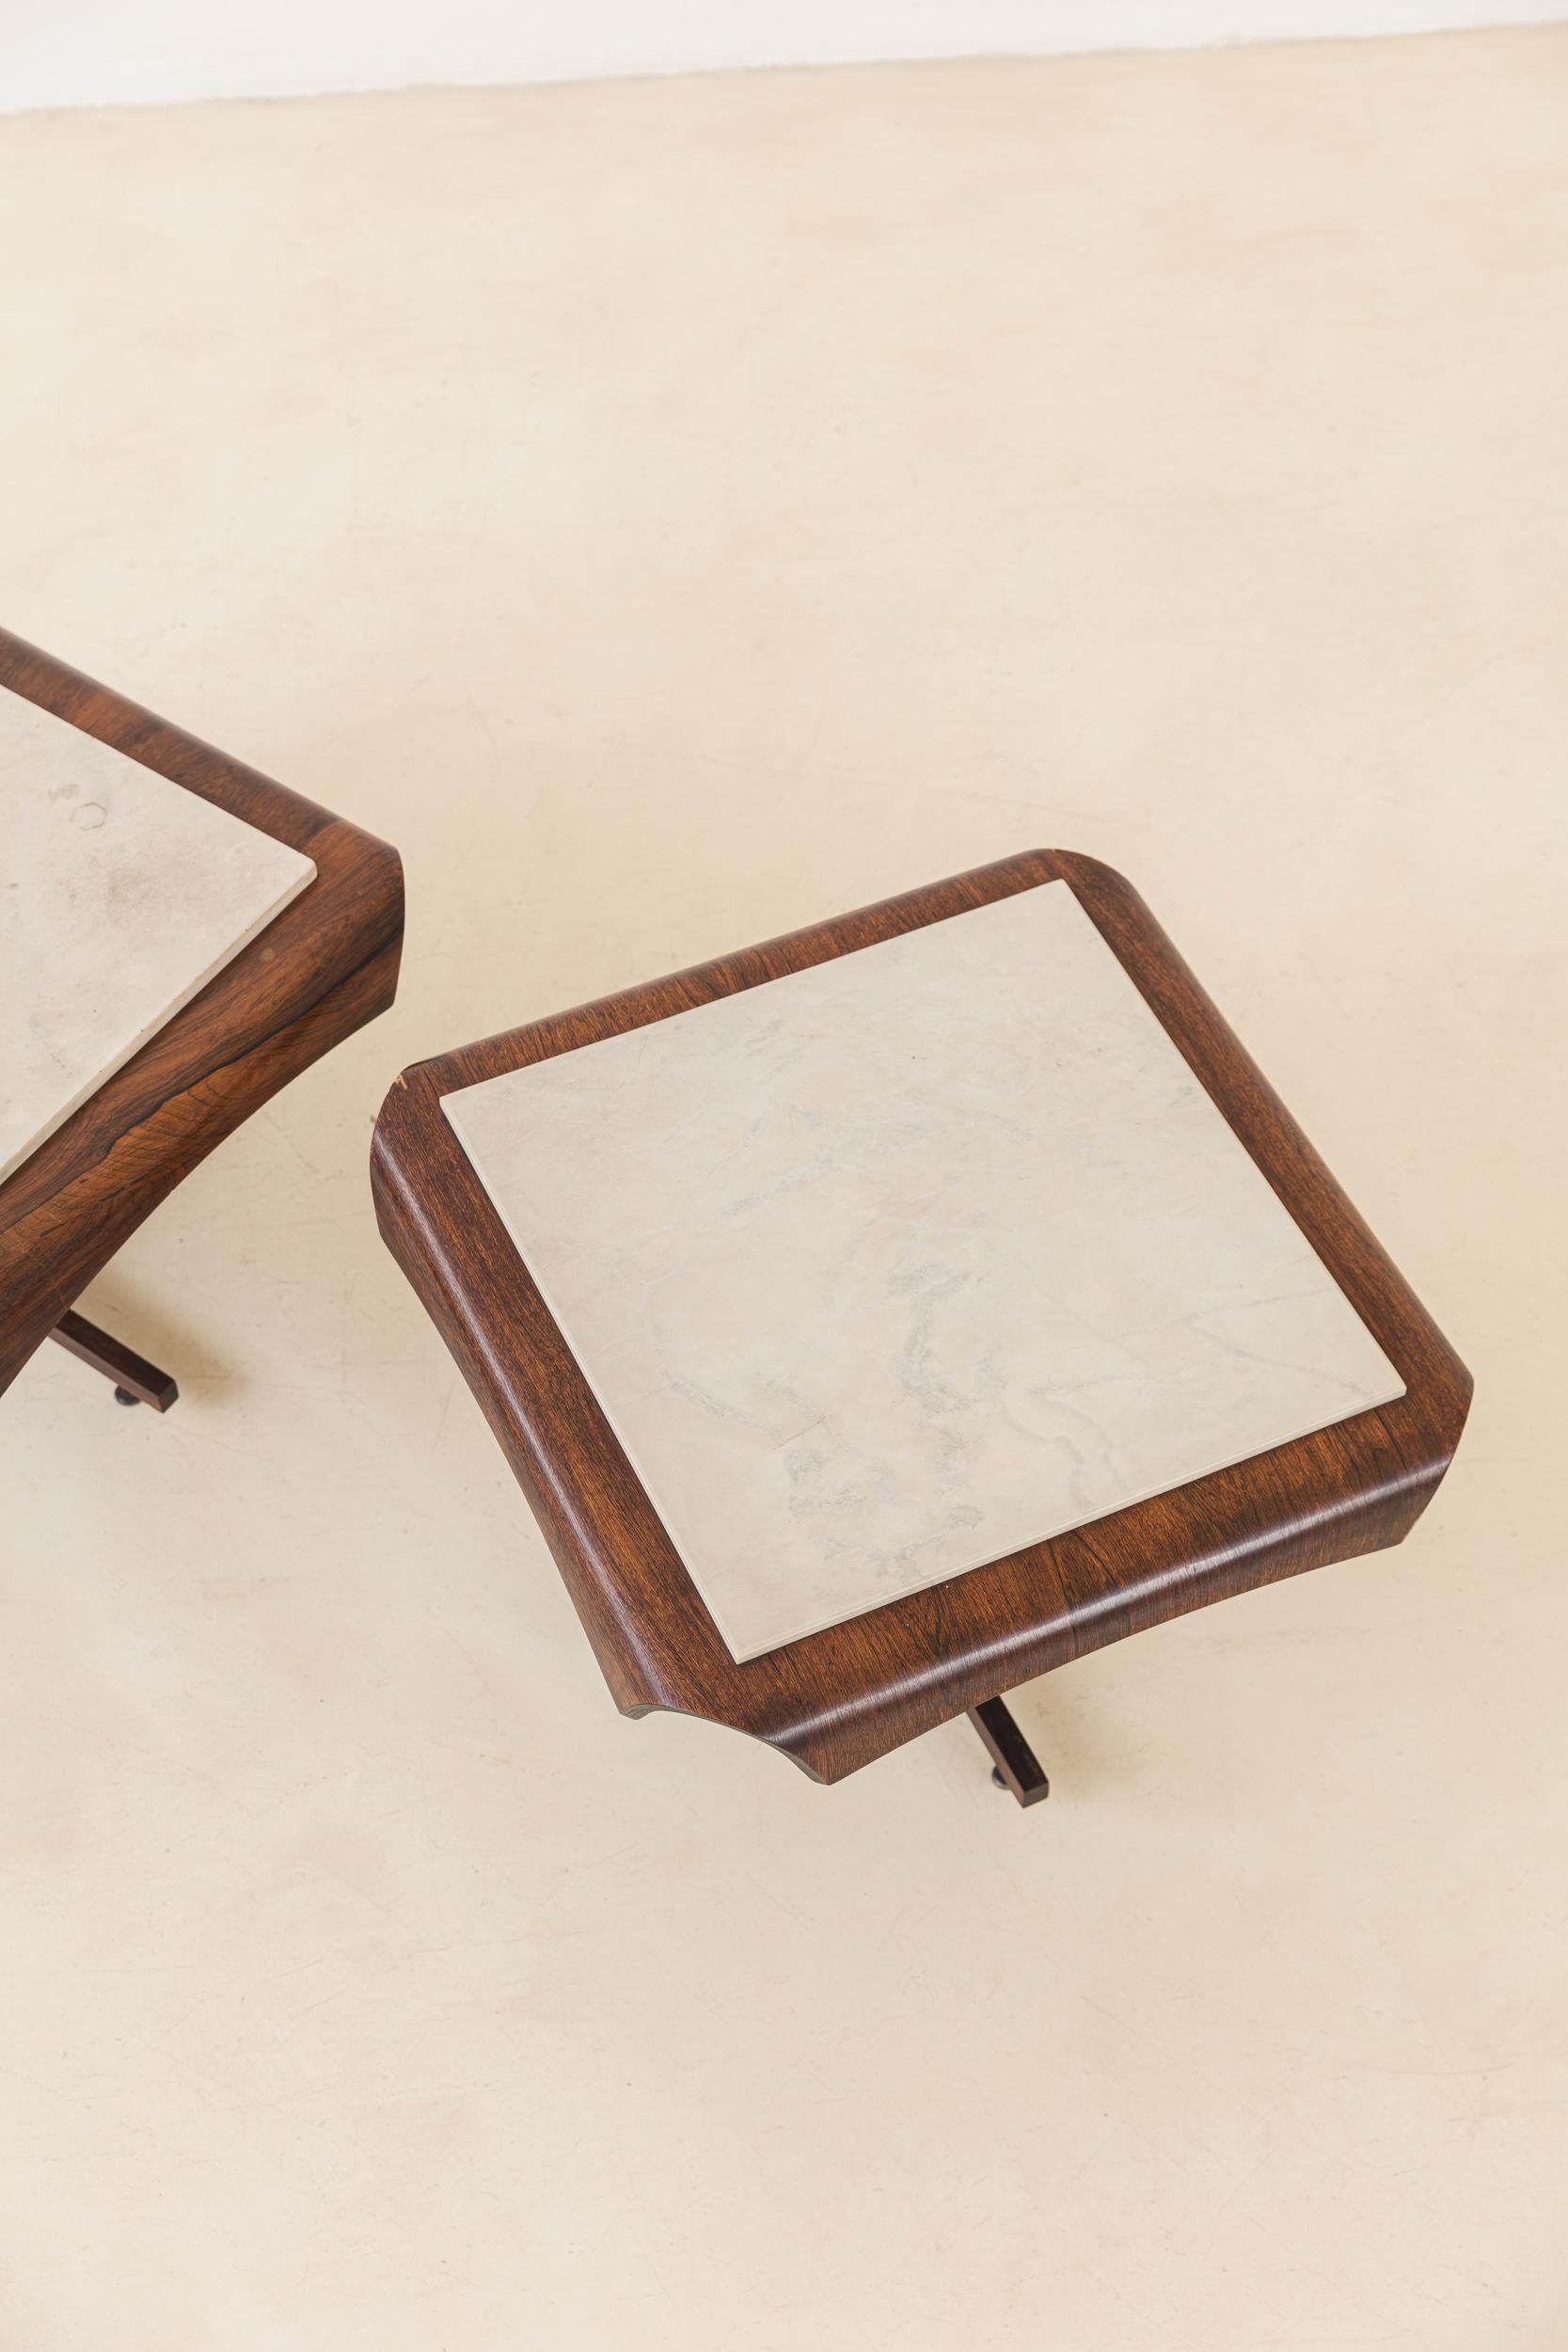 Mid-20th Century Side Tables by Jorge Zalszupin, Molded Rosewood and Mable, Brazil, 1964 For Sale